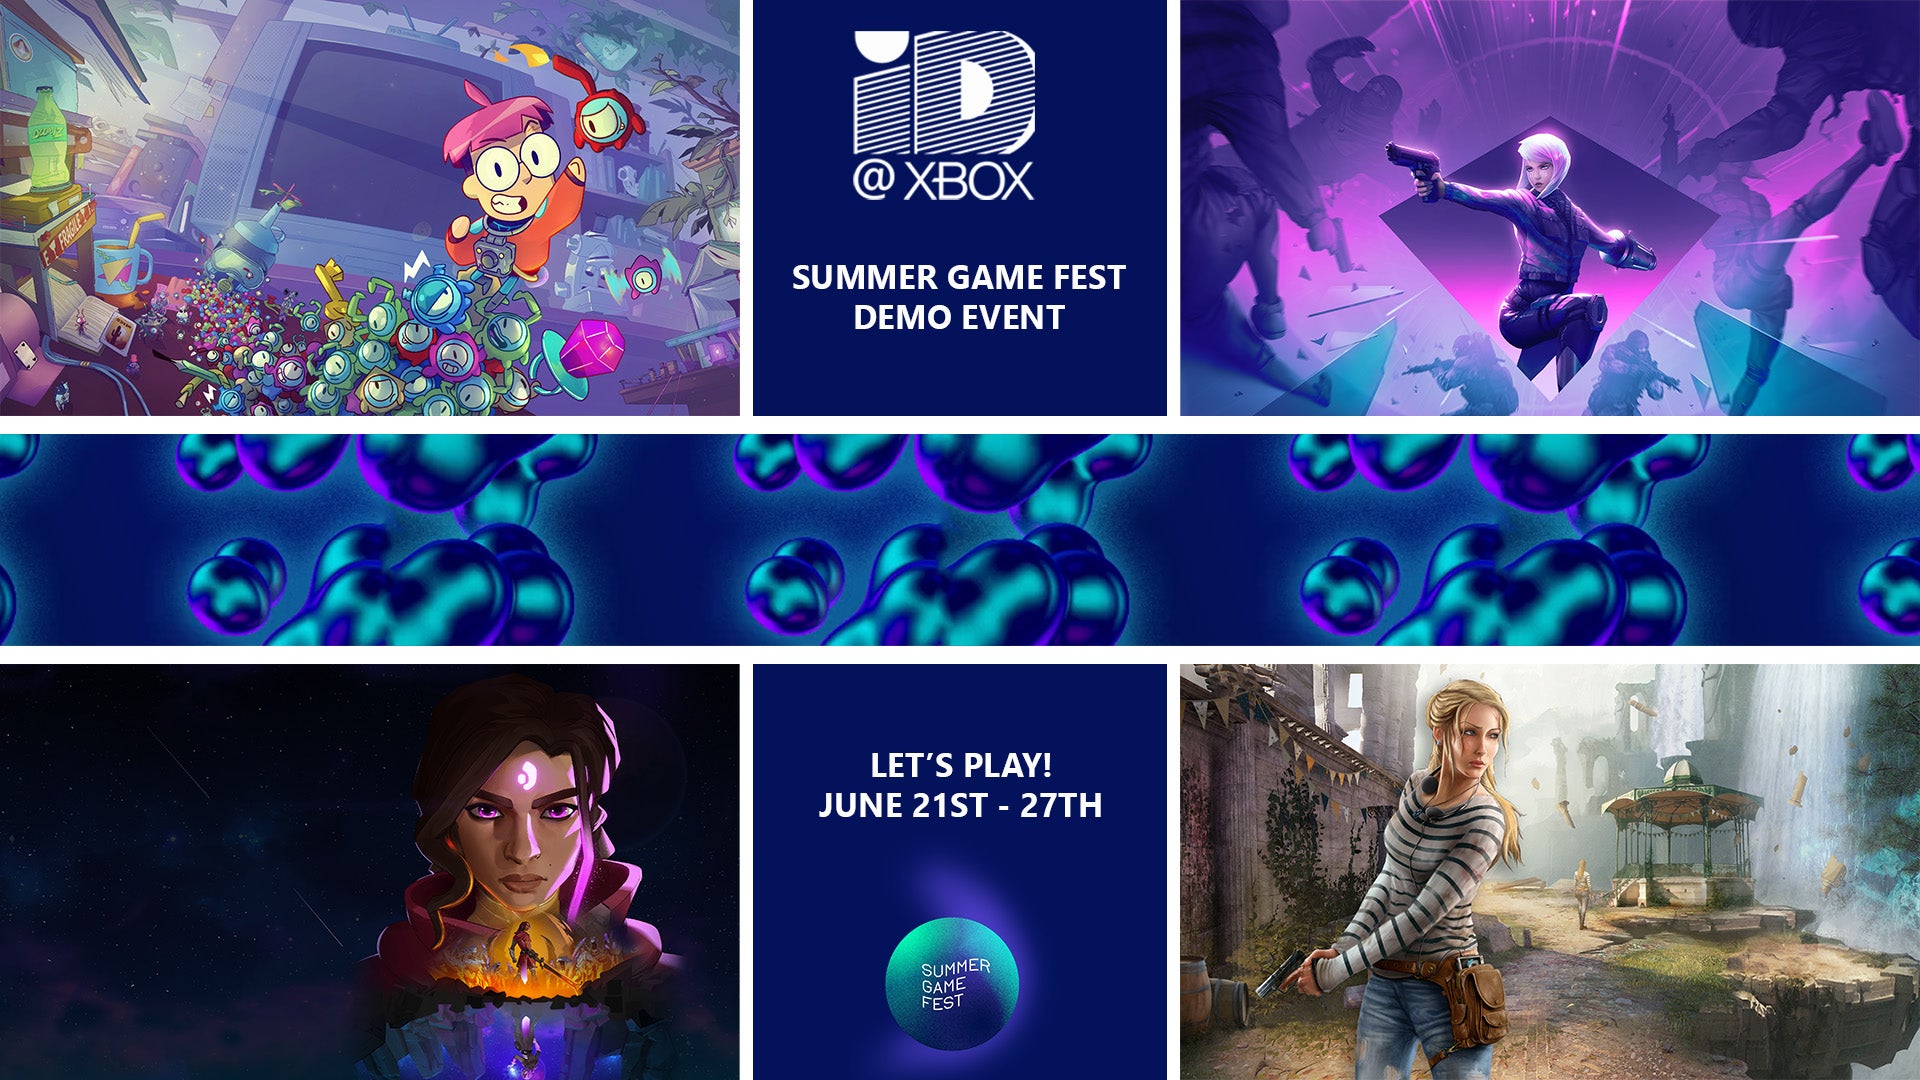 ID@Xbox's Summer Game Fest brings seven days of playable demos